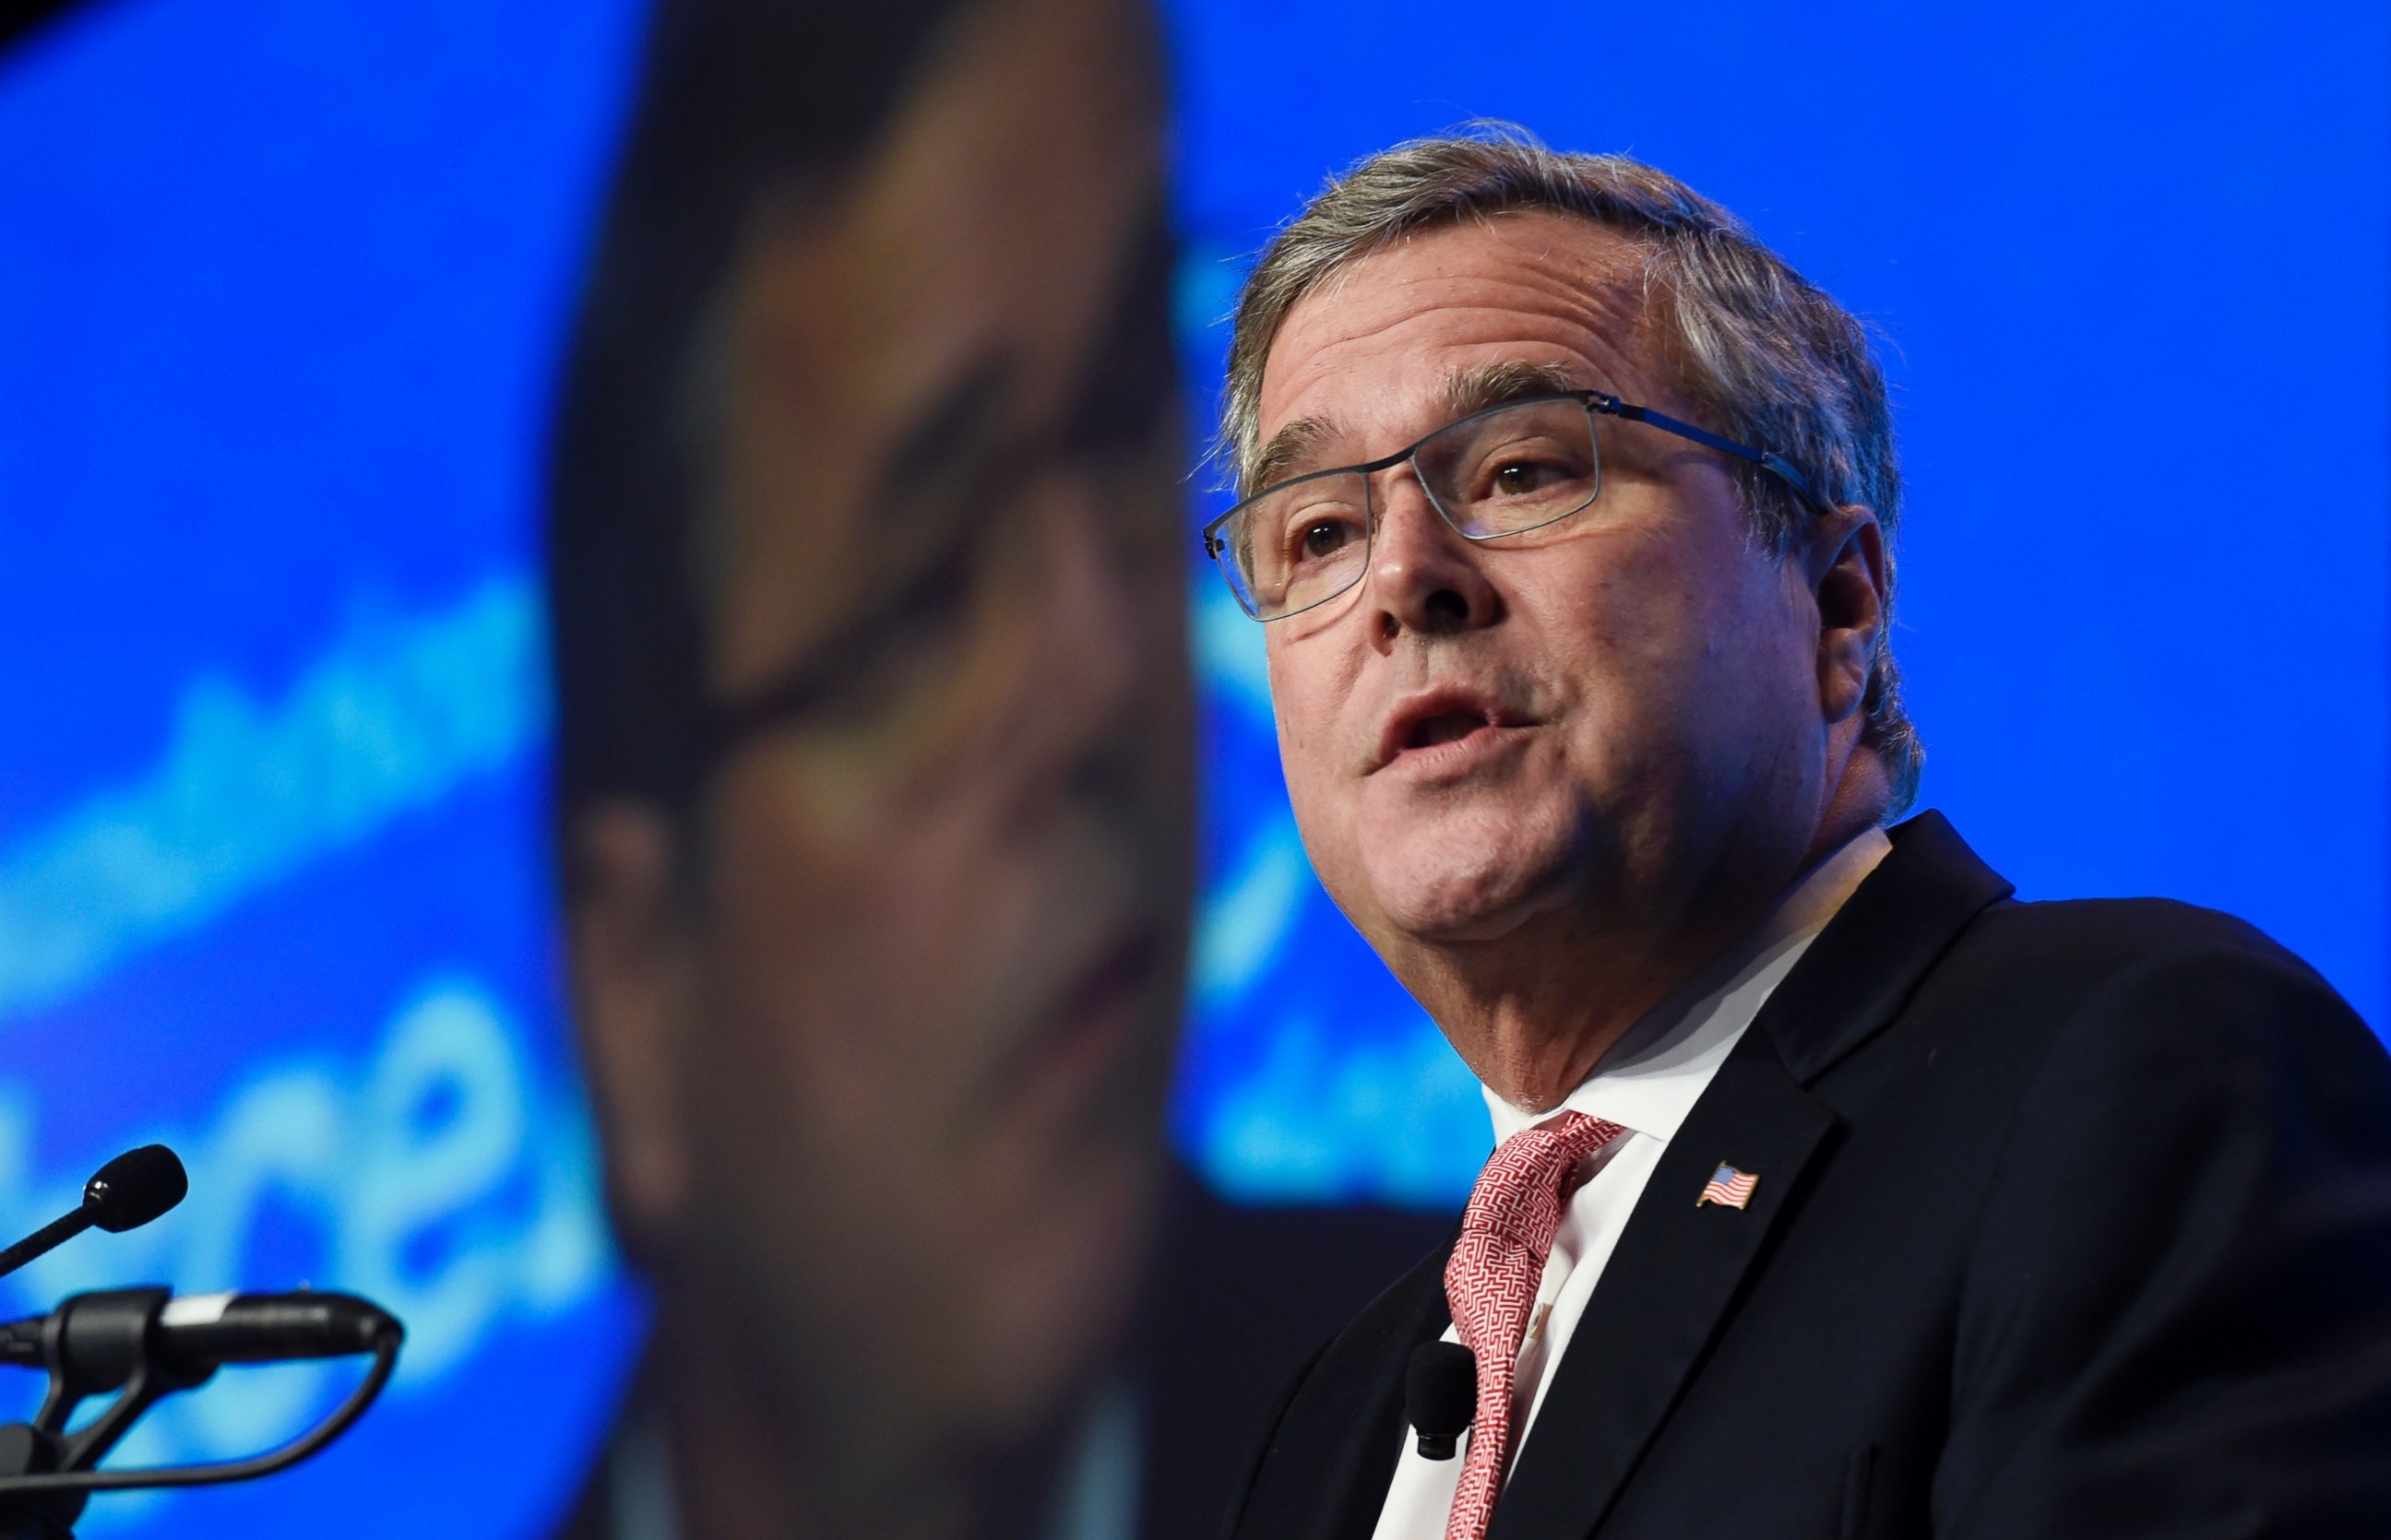 PHOTO: FILE - In this Nov. 20, 2014, file photo, former Florida Gov. Jeb Bush gives the keynote address at the National Summit on Education Reform in Washington. 